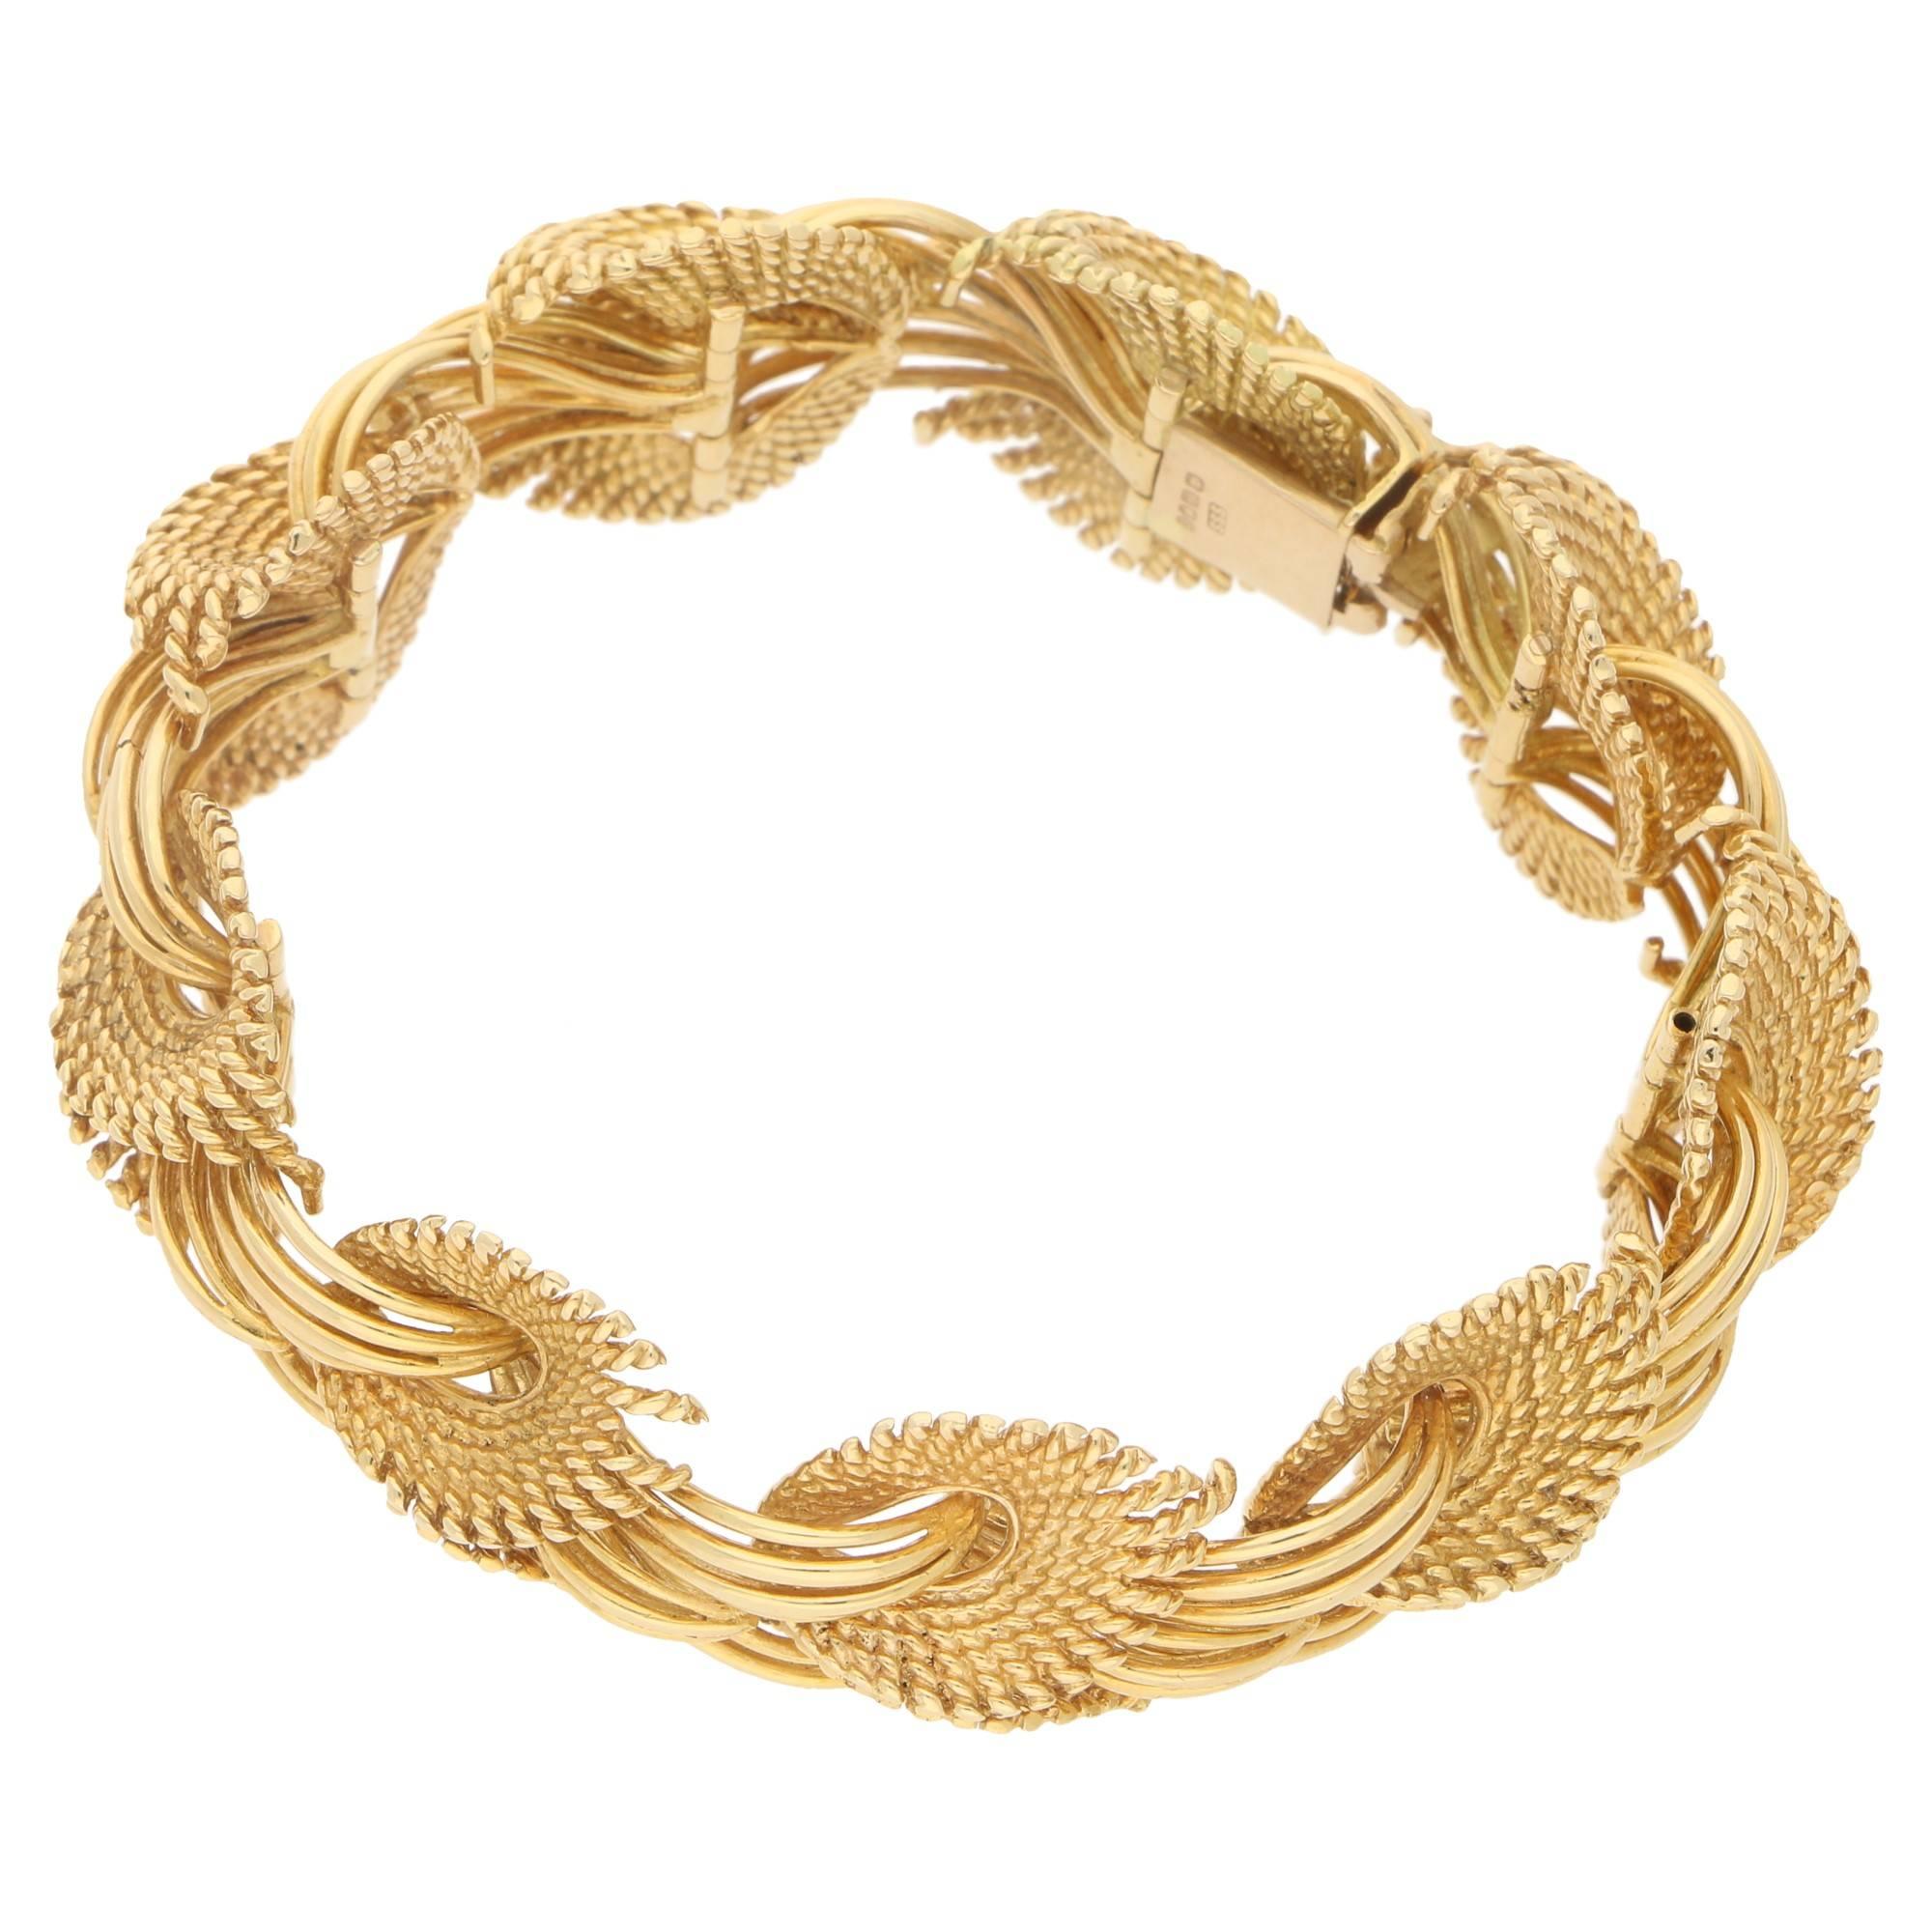 A solid 18 carat yellow gold cuff bracelet. The bracelet is formed of stylised leaf motifs in textured gold, with highly polished gold wire. The bracelet is fitted with a subtle tongue piece clasp keeping the pattern fluid when worn. Measures 6.5